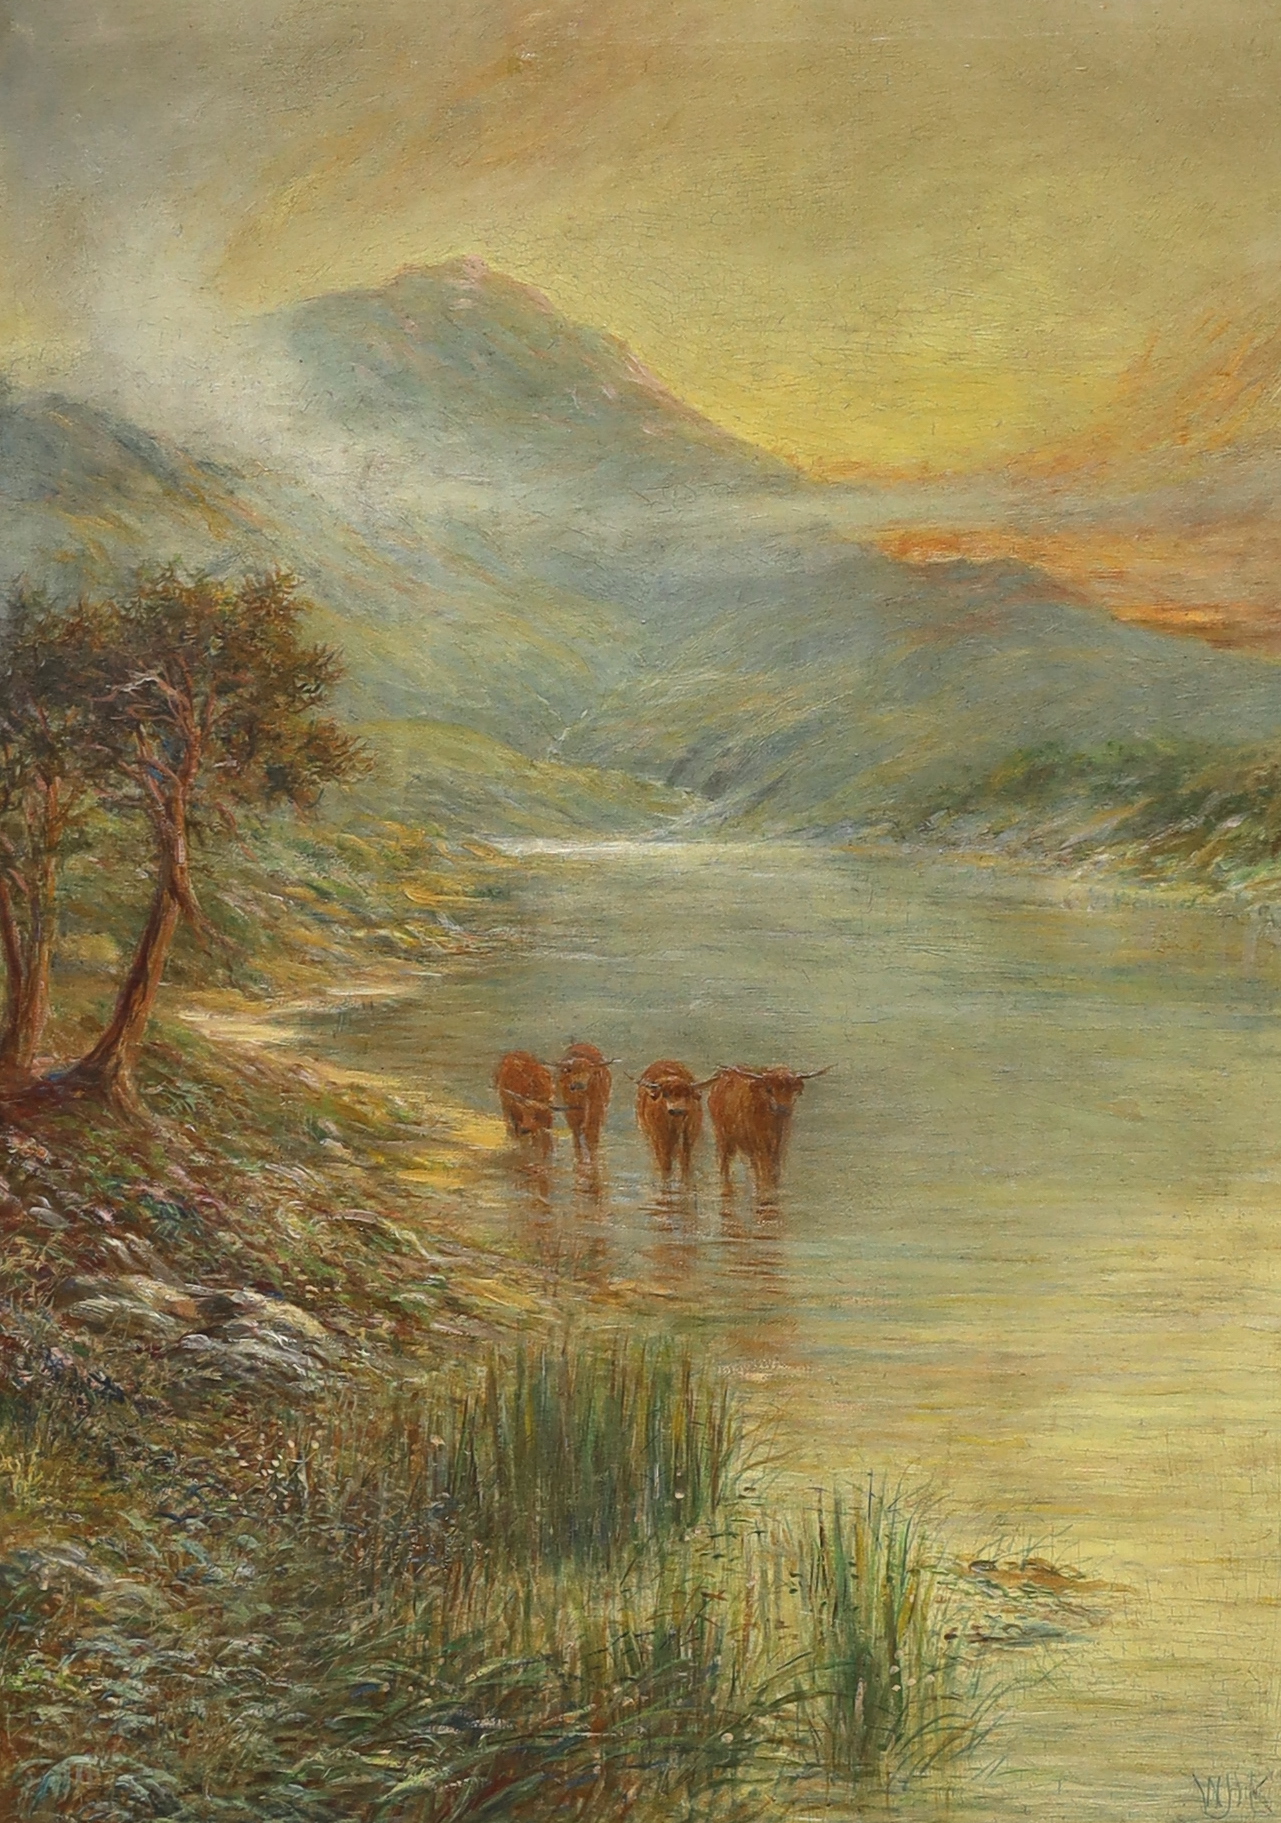 W.J.H., Scottish, oil on canvas, Mountainous landscape with highland cattle, signed with monogram, 75 x 54cm